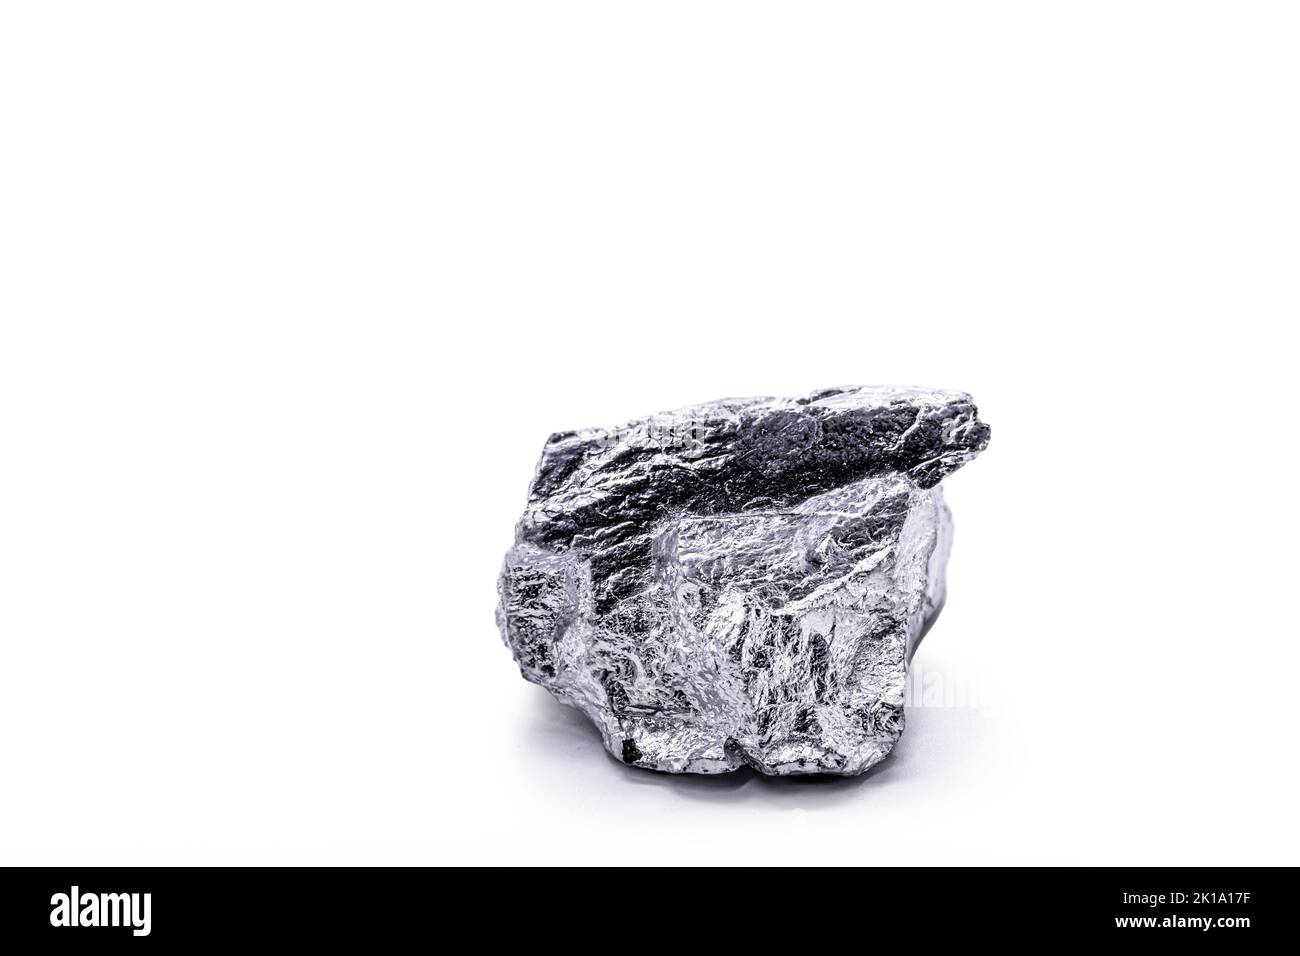 Iridium is a metallic chemical element belonging to the class of transition metals, silver. Used in high strength alloys that can withstand high tempe Stock Photo